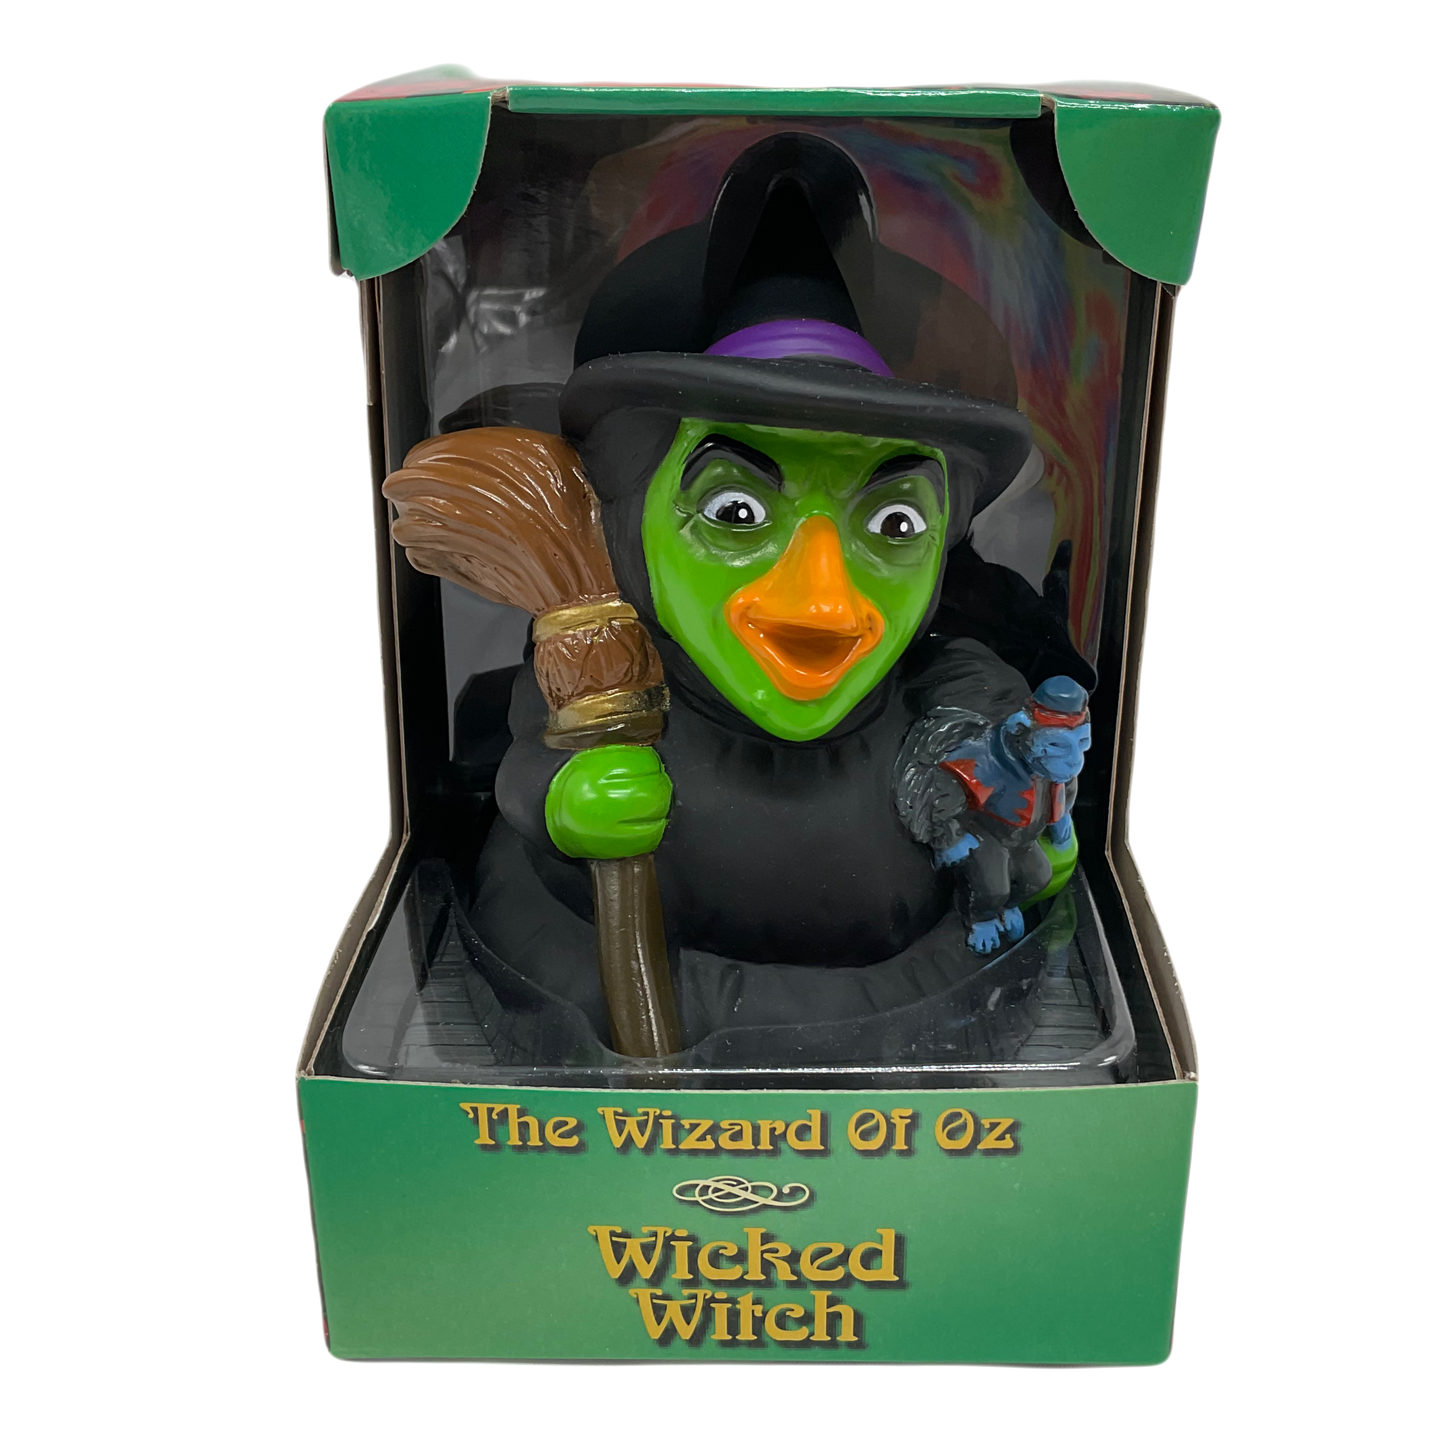 Wicked Witch Wizard of Oz Celebriduck Rubber Duck